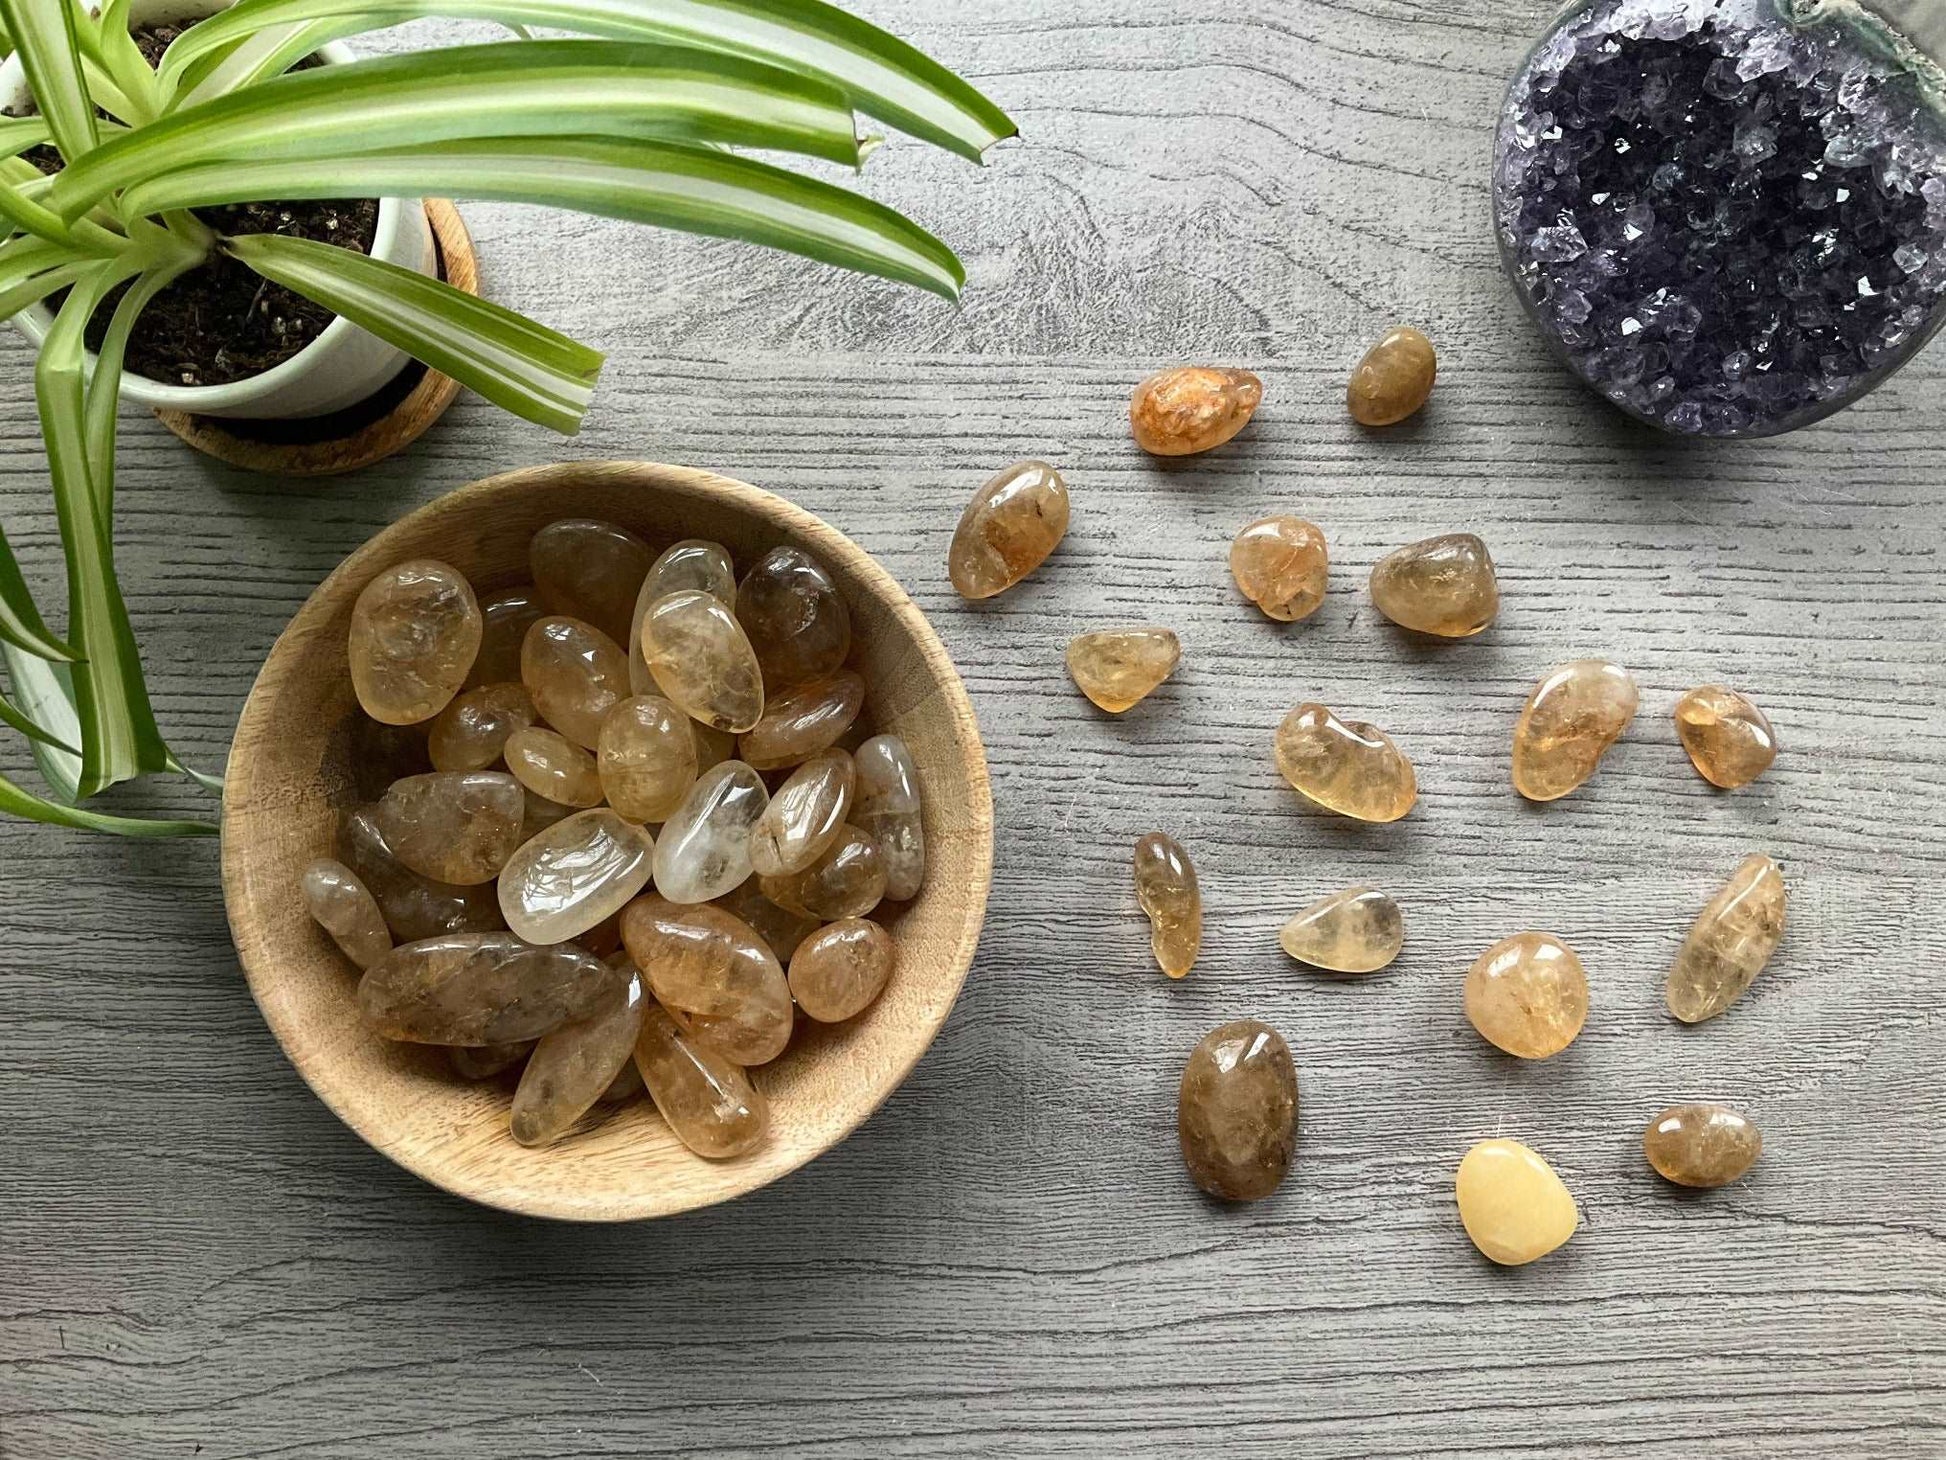 Pictured are various golden healer tumbled stones.